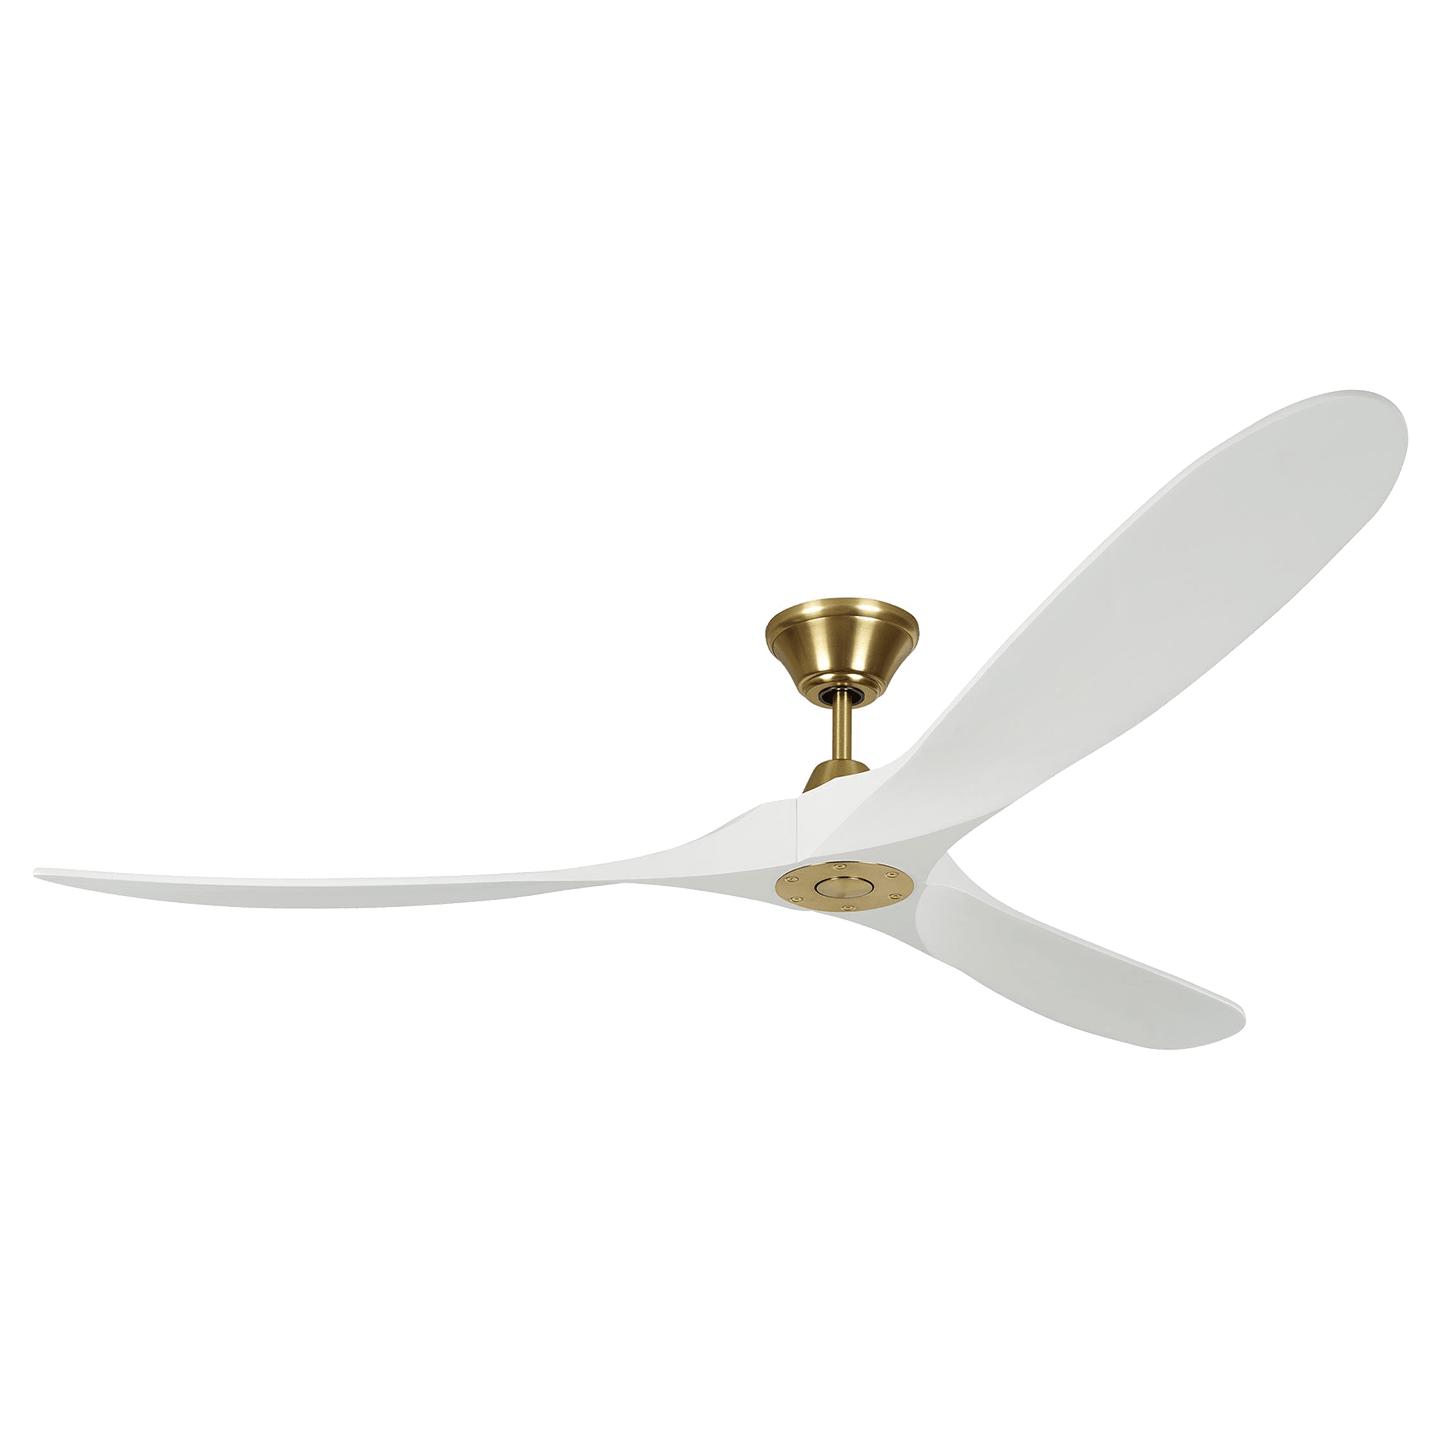 Burnished Brass Housing With Matte White Blades